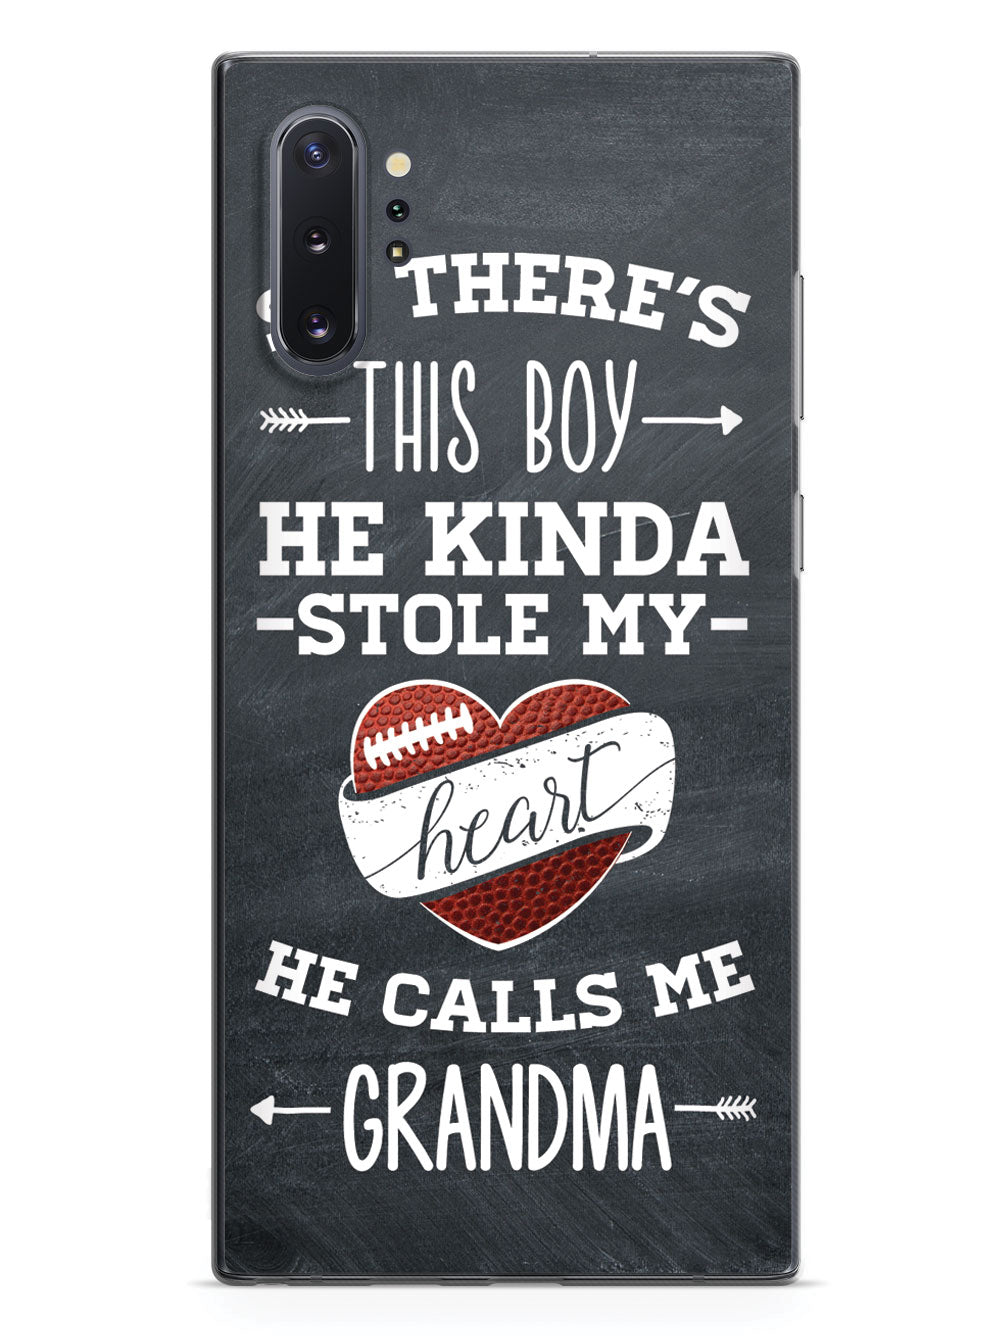 So there's this Boy - Football Player - Grandma Case